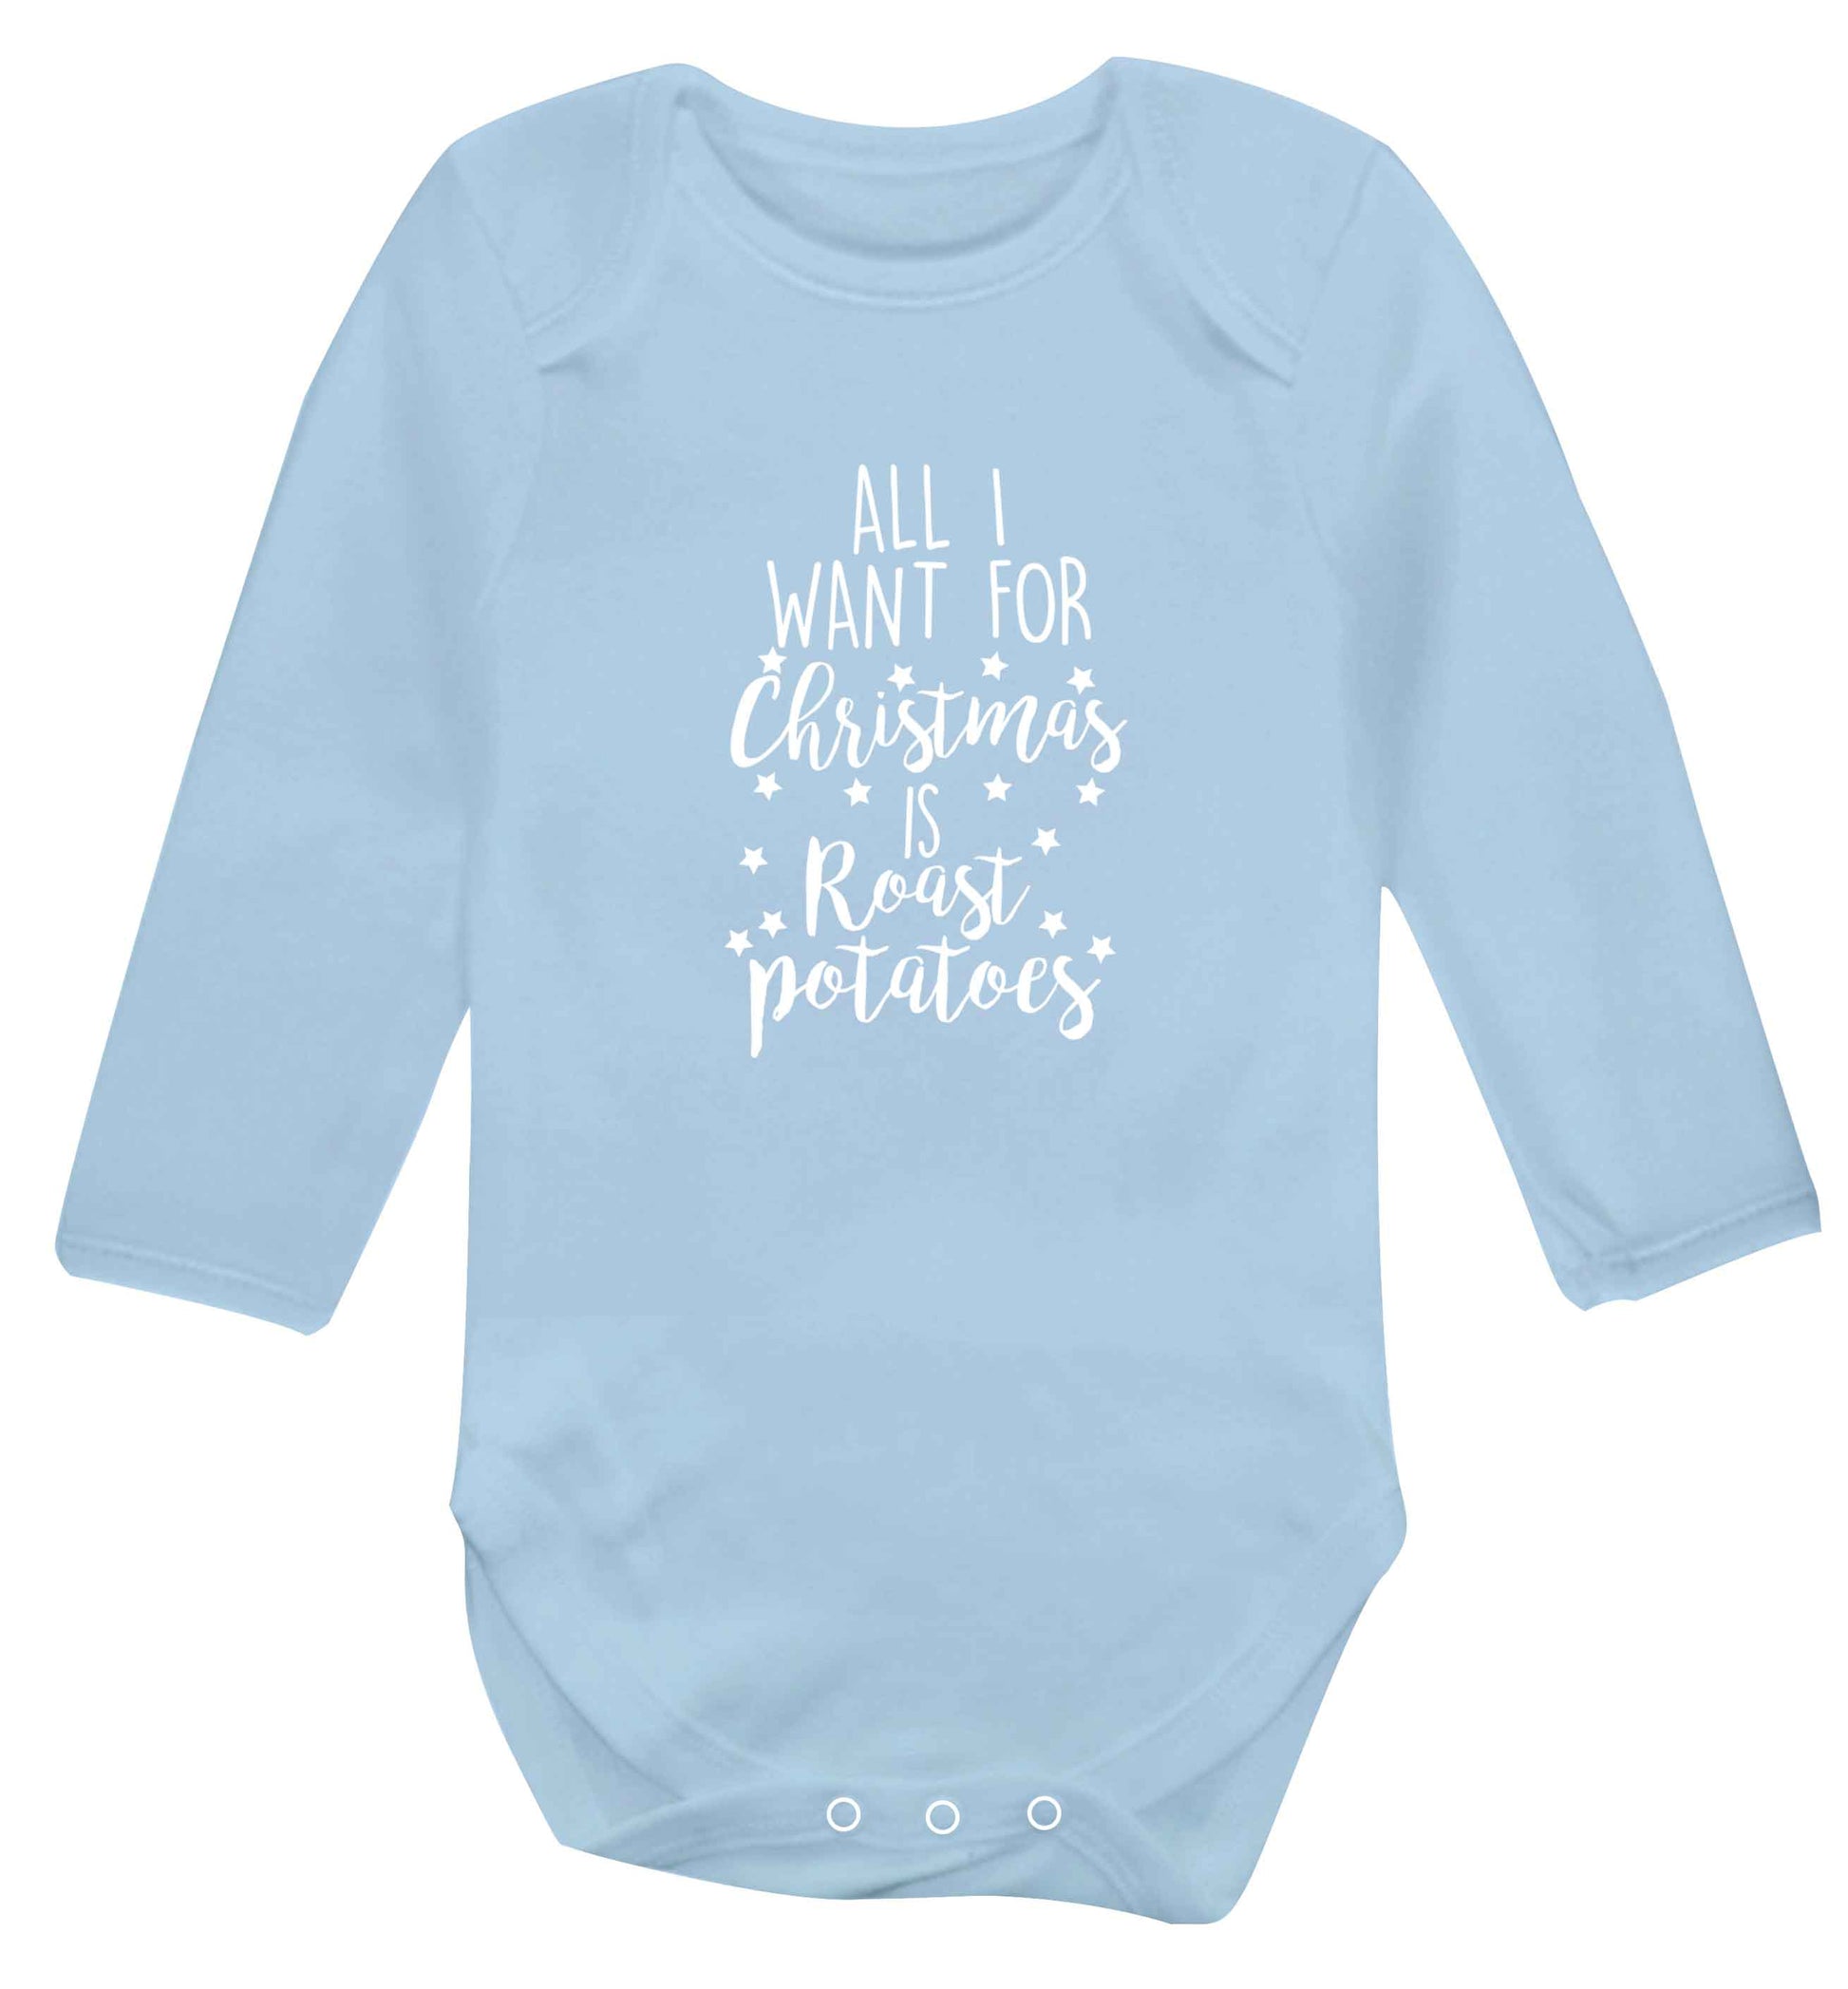 All I want for Christmas is roast potatoes baby vest long sleeved pale blue 6-12 months